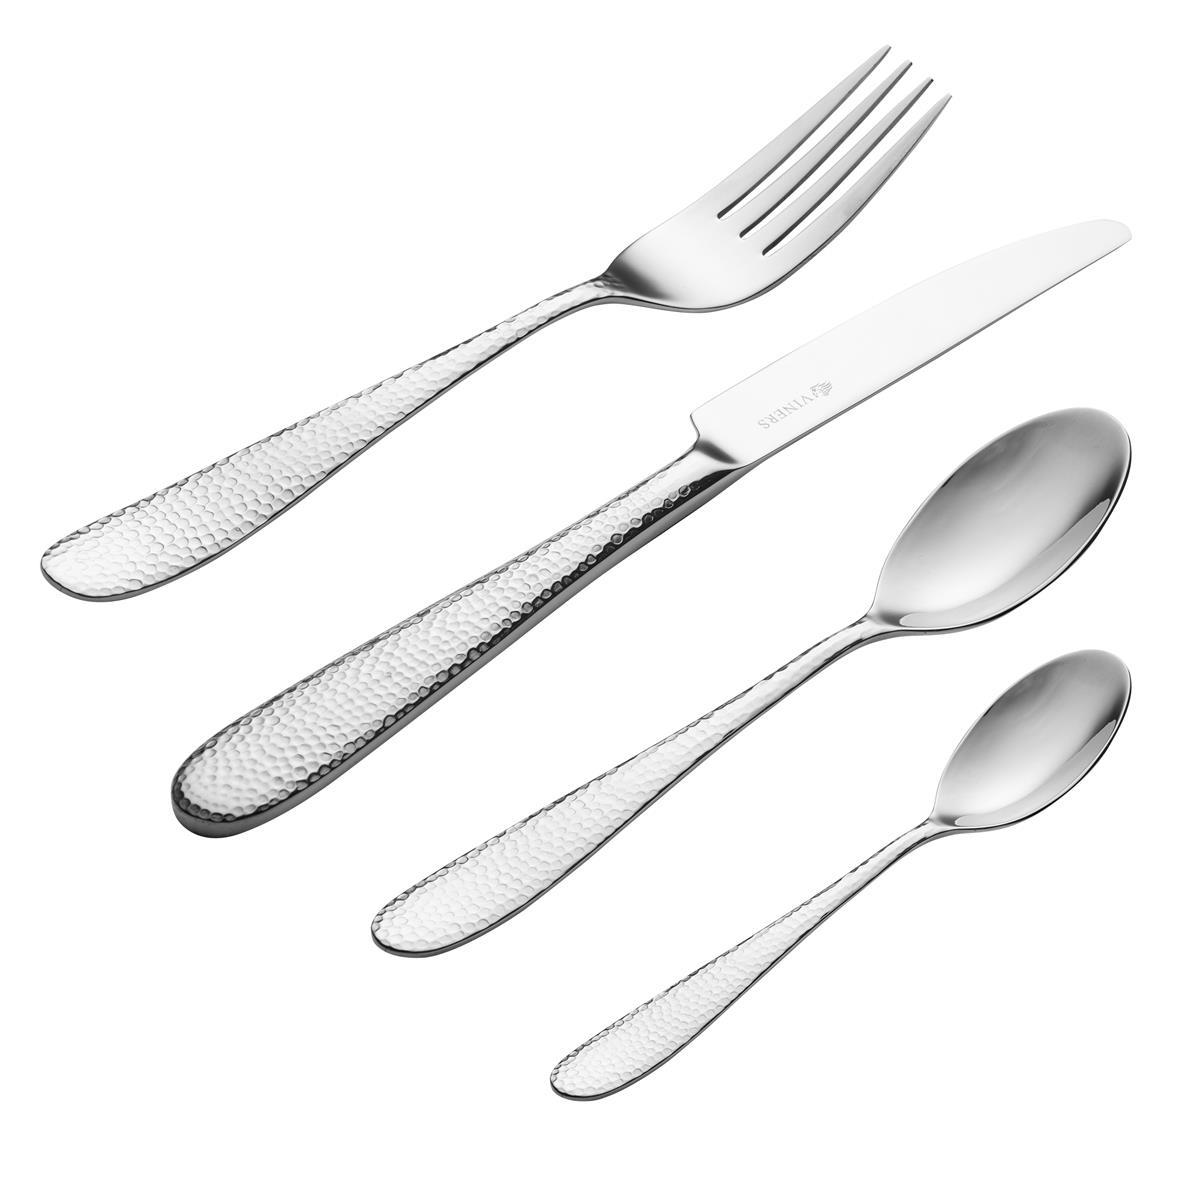 Is there a guarantee for the Viners Glamour Cutlery Set?